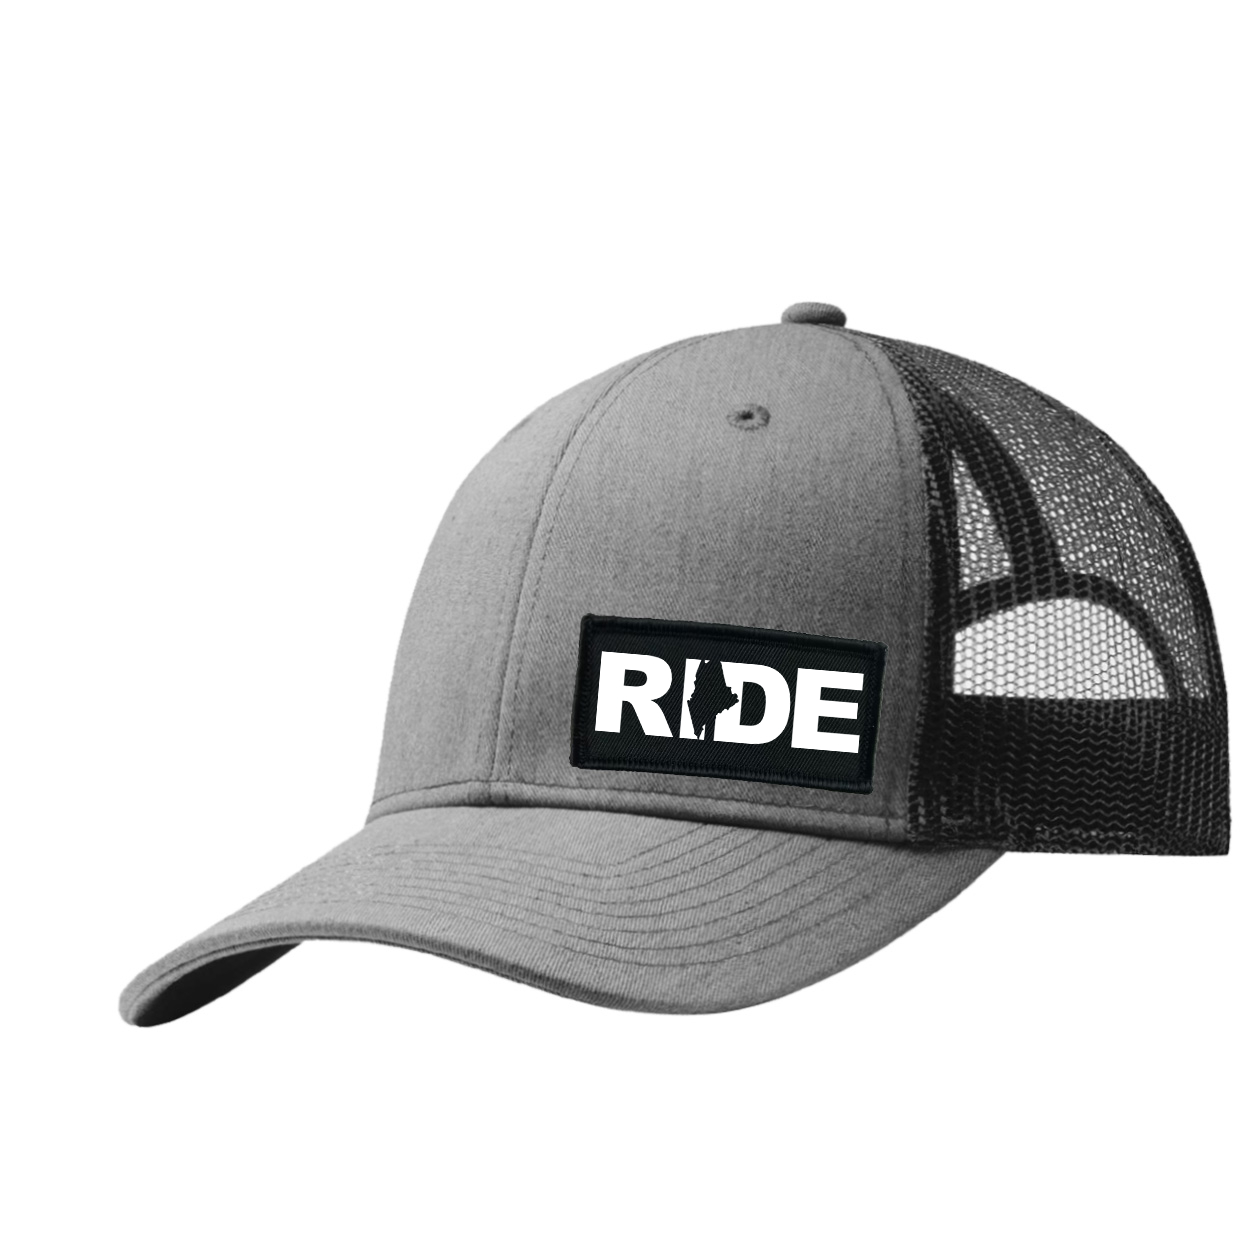 Ride Maine Night Out Woven Patch Snapback Trucker Hat Heather Gray/Black (White Logo)